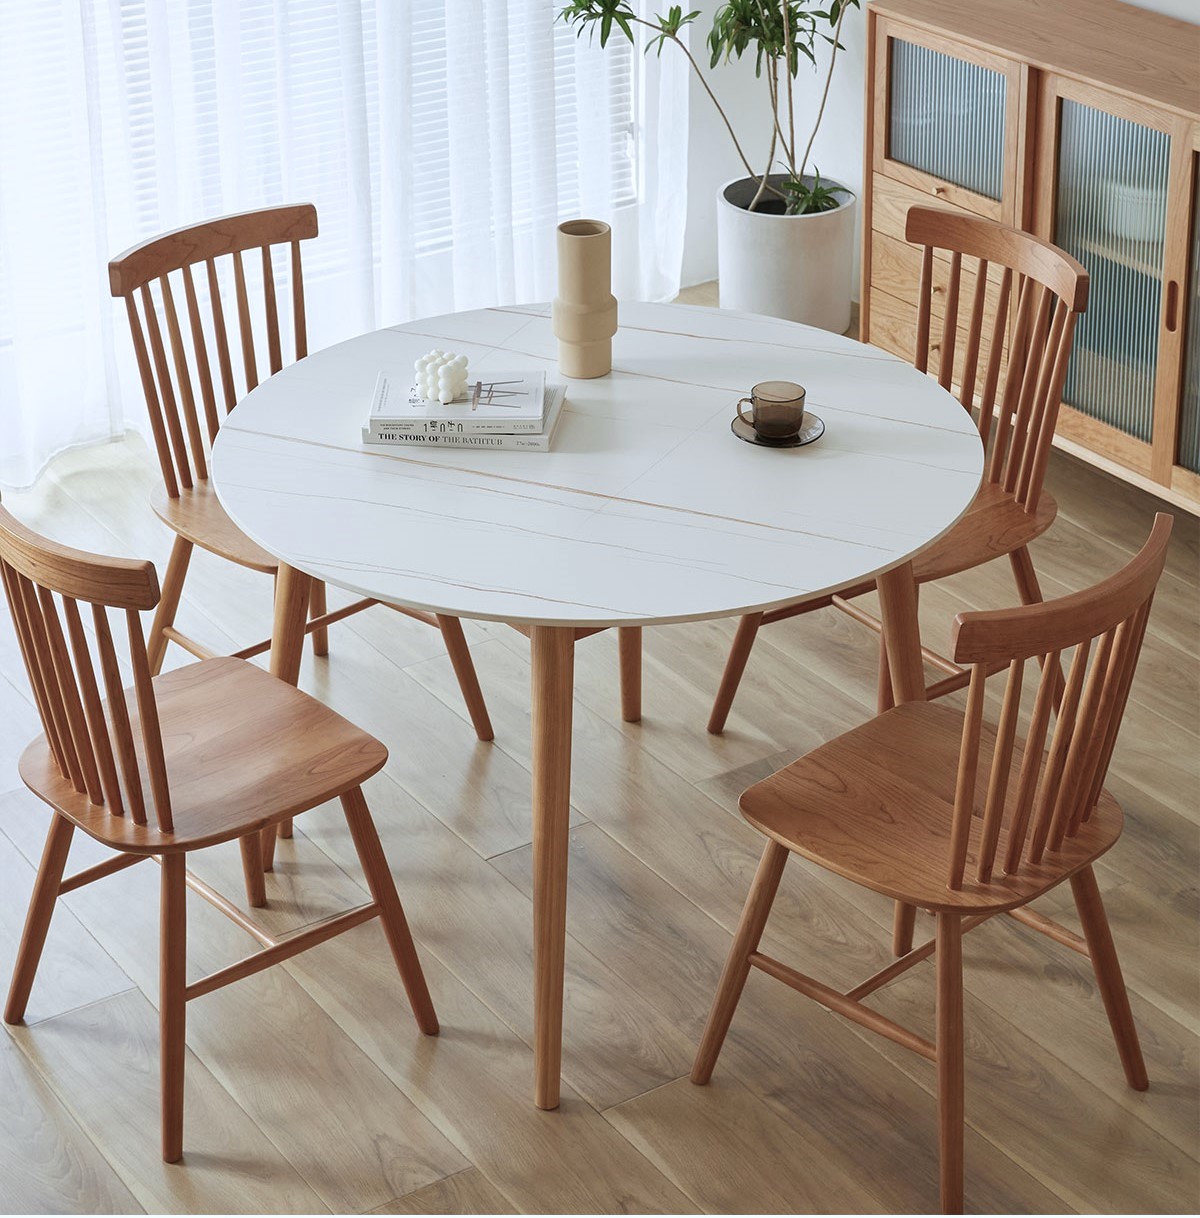 Round table + 4 chairs(YR-2D#)